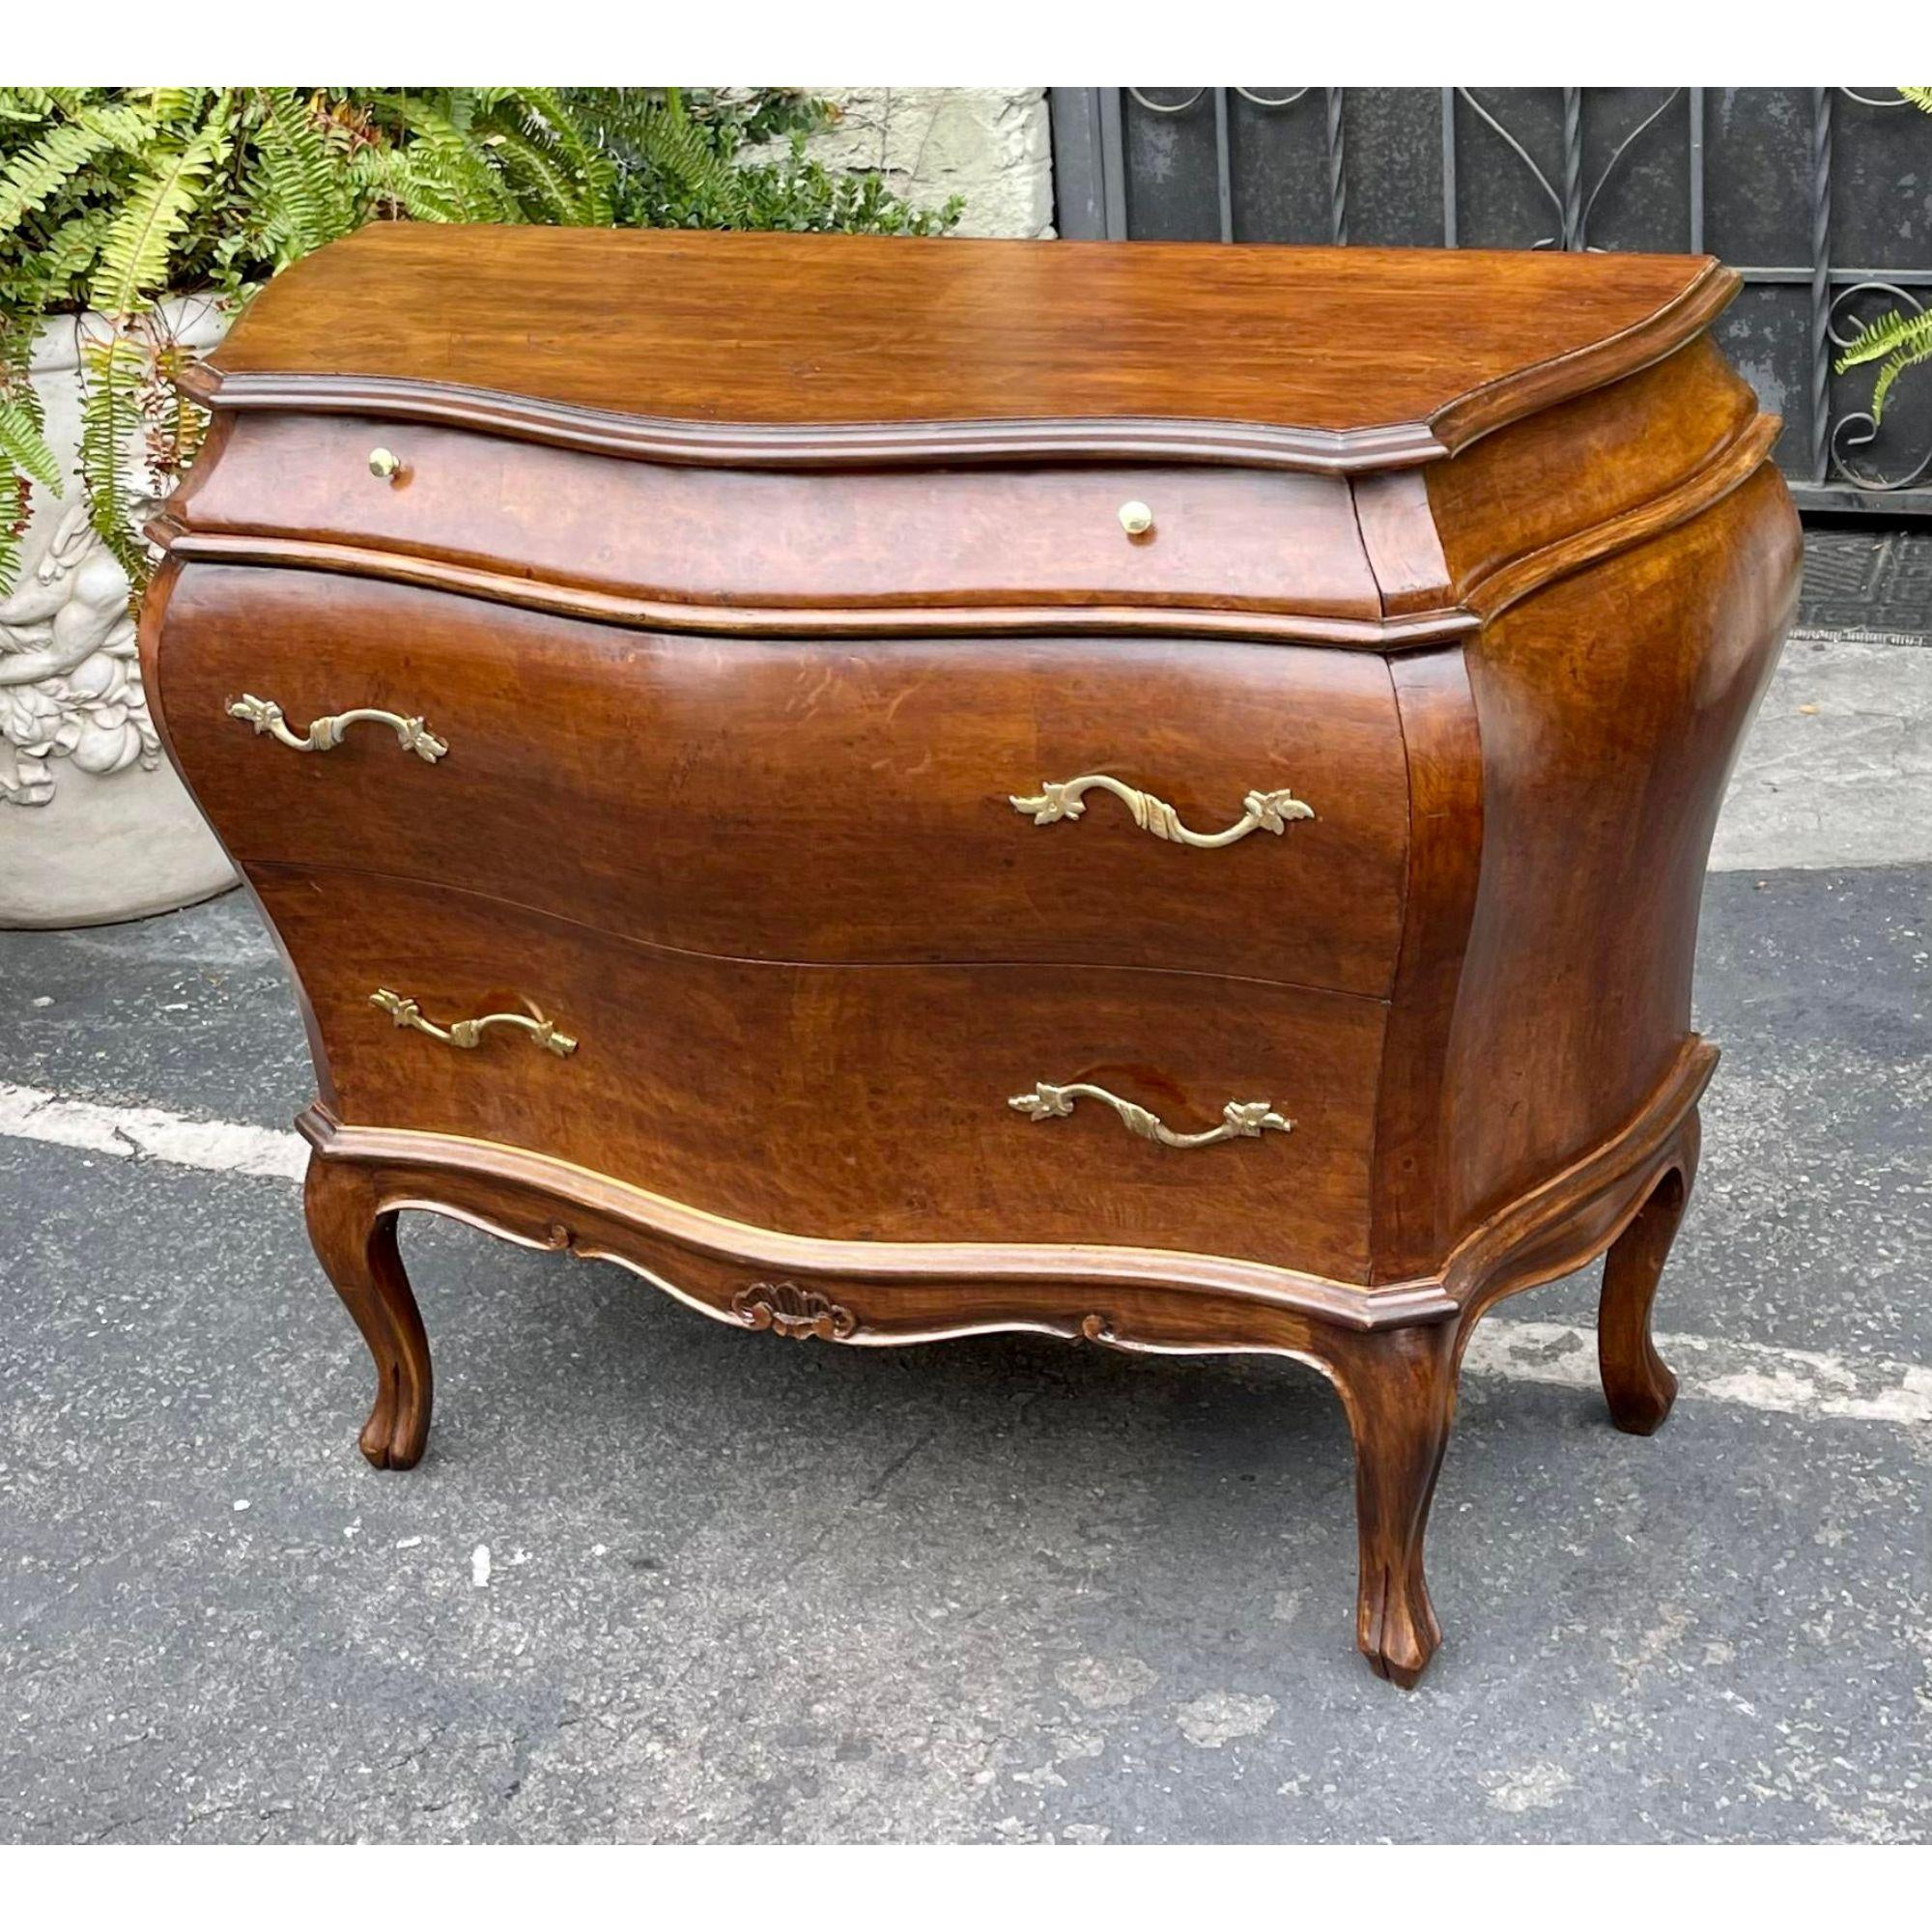 19th C Style Italian Bombay burl walnut commode night stand end table.

Additional information:
Materials: bronze, walnut
Color: Sienna
Period: Late 20th Century
Styles: Italian
Item Type: Vintage, Antique or Pre-owned
Dimensions: 40